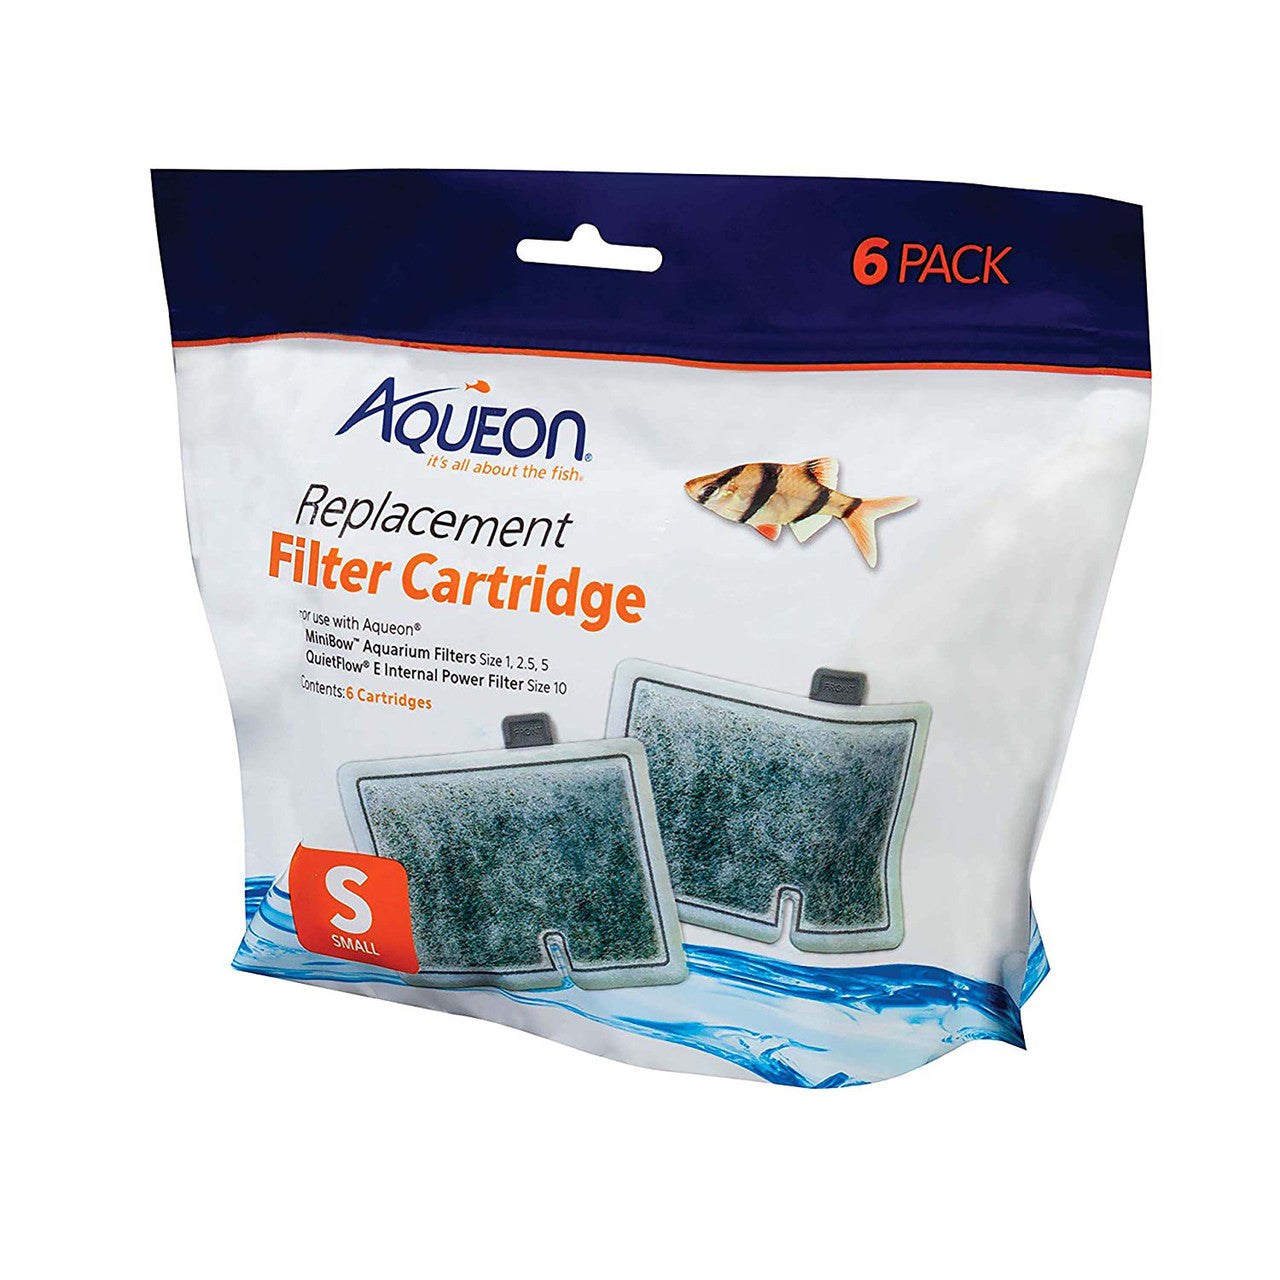 Aqueon Replacement Filter Cartridges Small - 6 pack